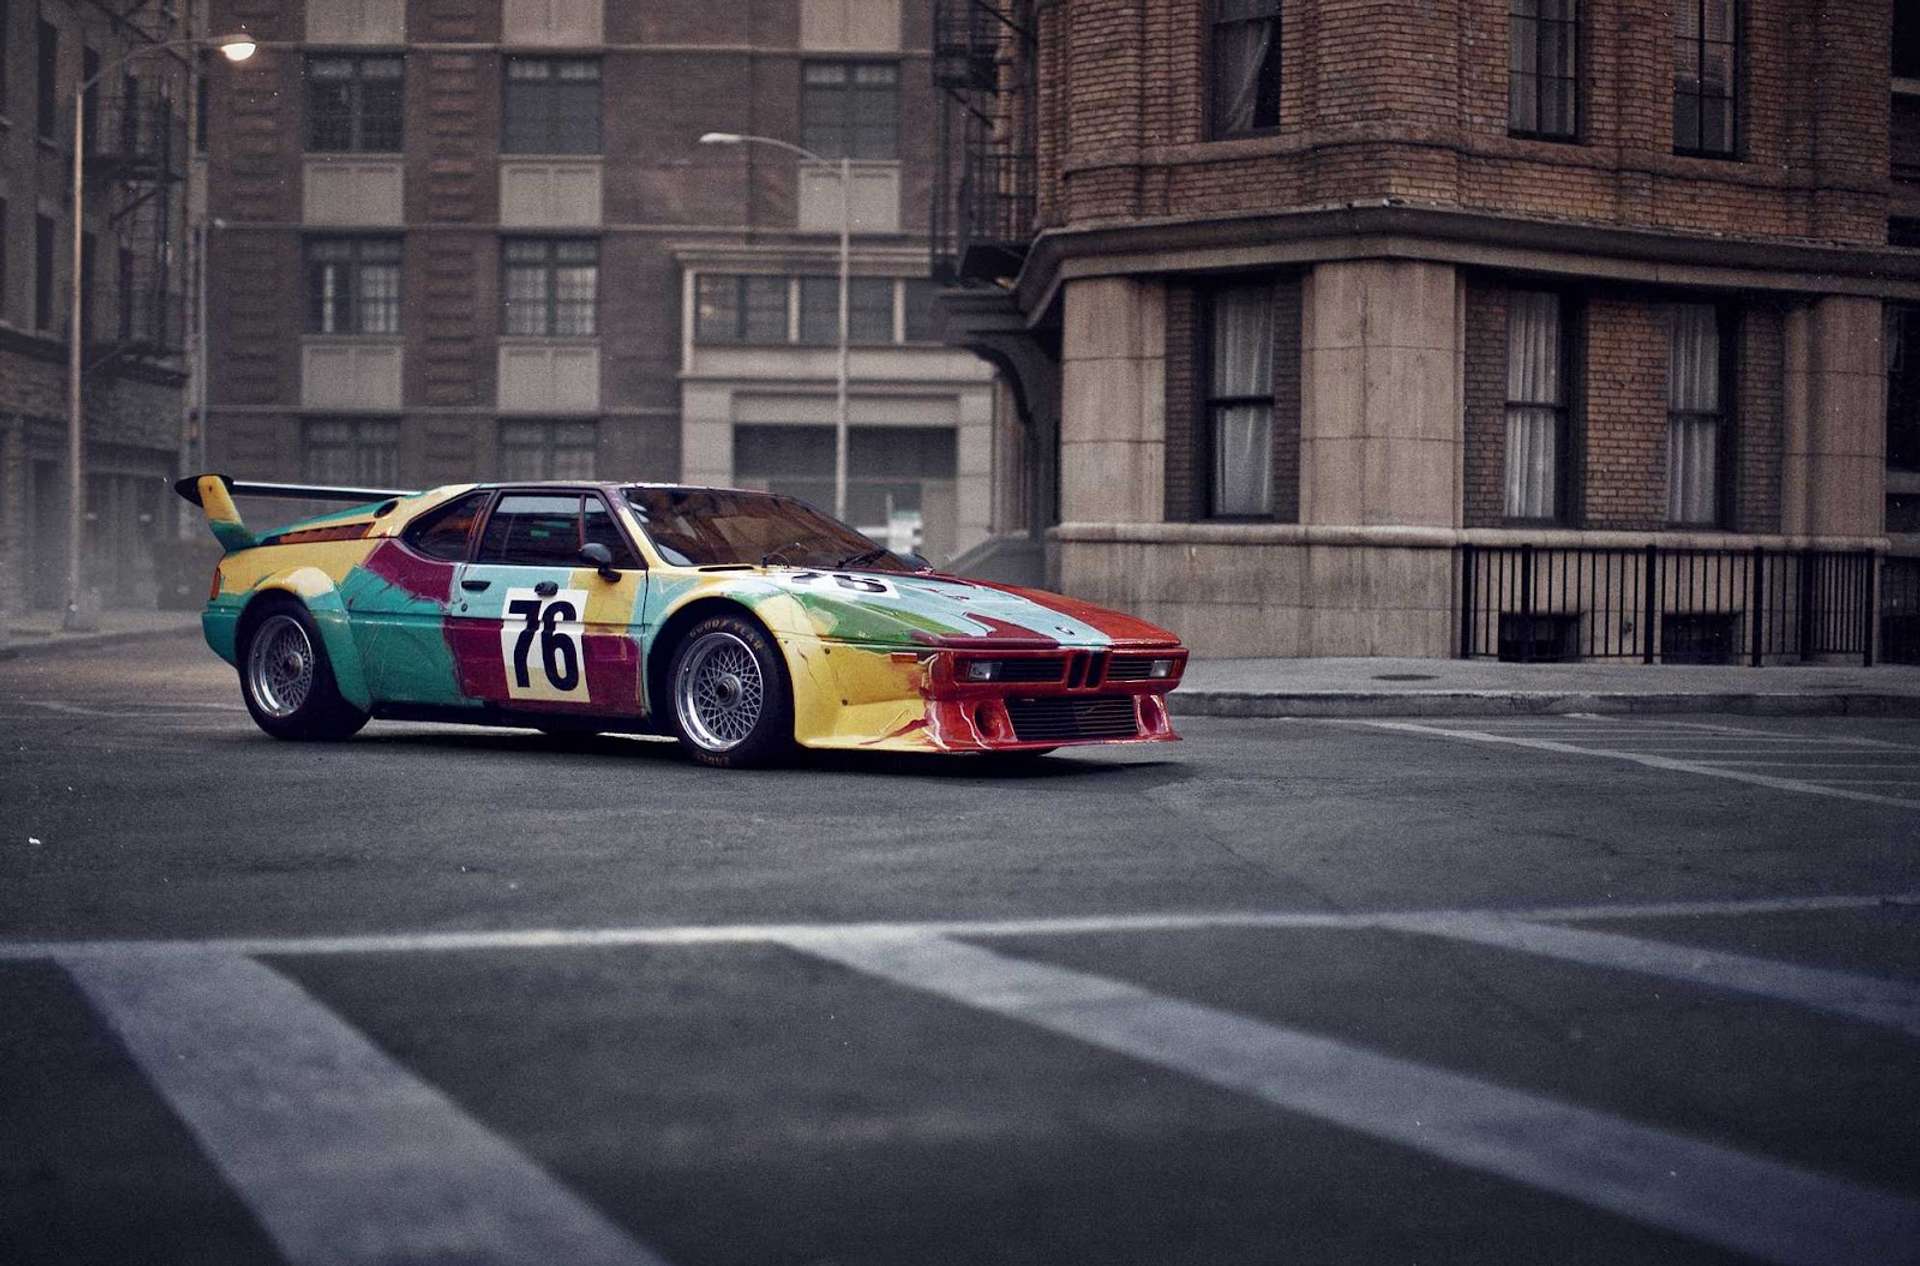  A BMW car designed by Andy Warhol in 1979, covered in vibrant, multi-coloured stripes and brushstrokes reminiscent of Warhol's pop art style.